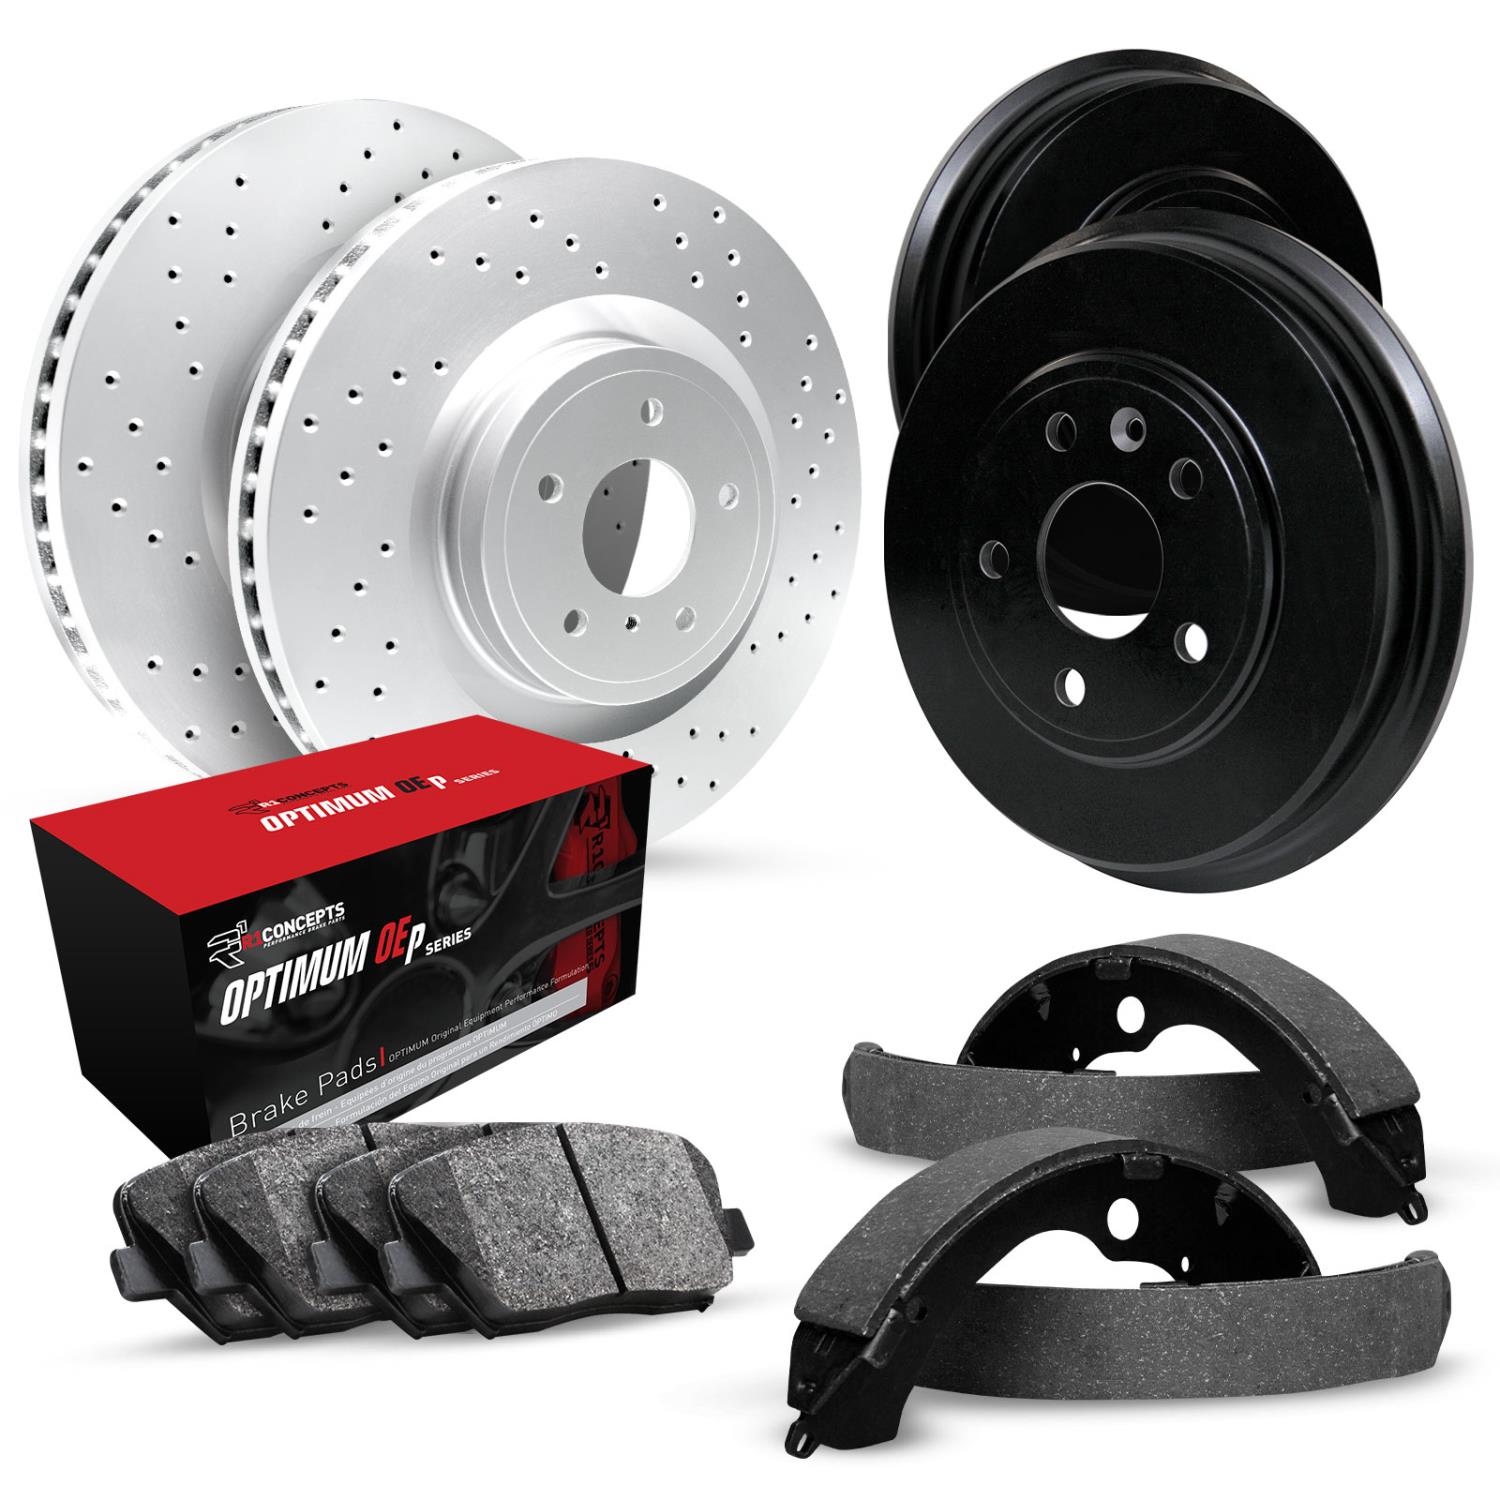 GEO-Carbon Drilled Brake Rotor & Drum Set w/Optimum OE Pads & Shoes, 1987-1988 GM, Position: Front & Rear